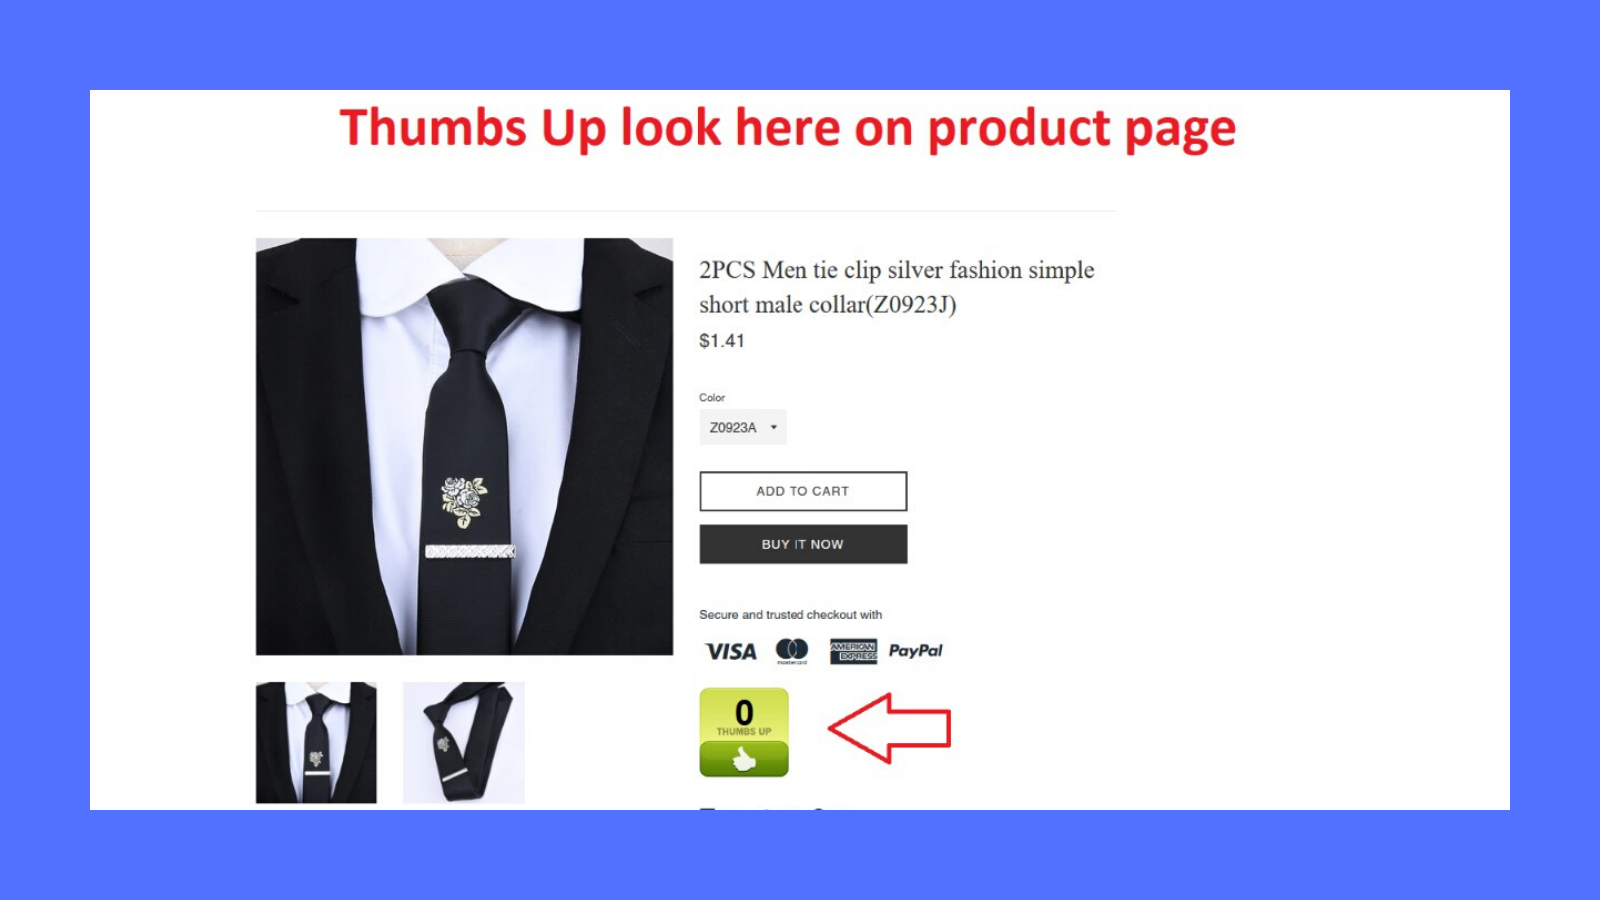 ThumbsUp provides you and easy way for users to see and vote